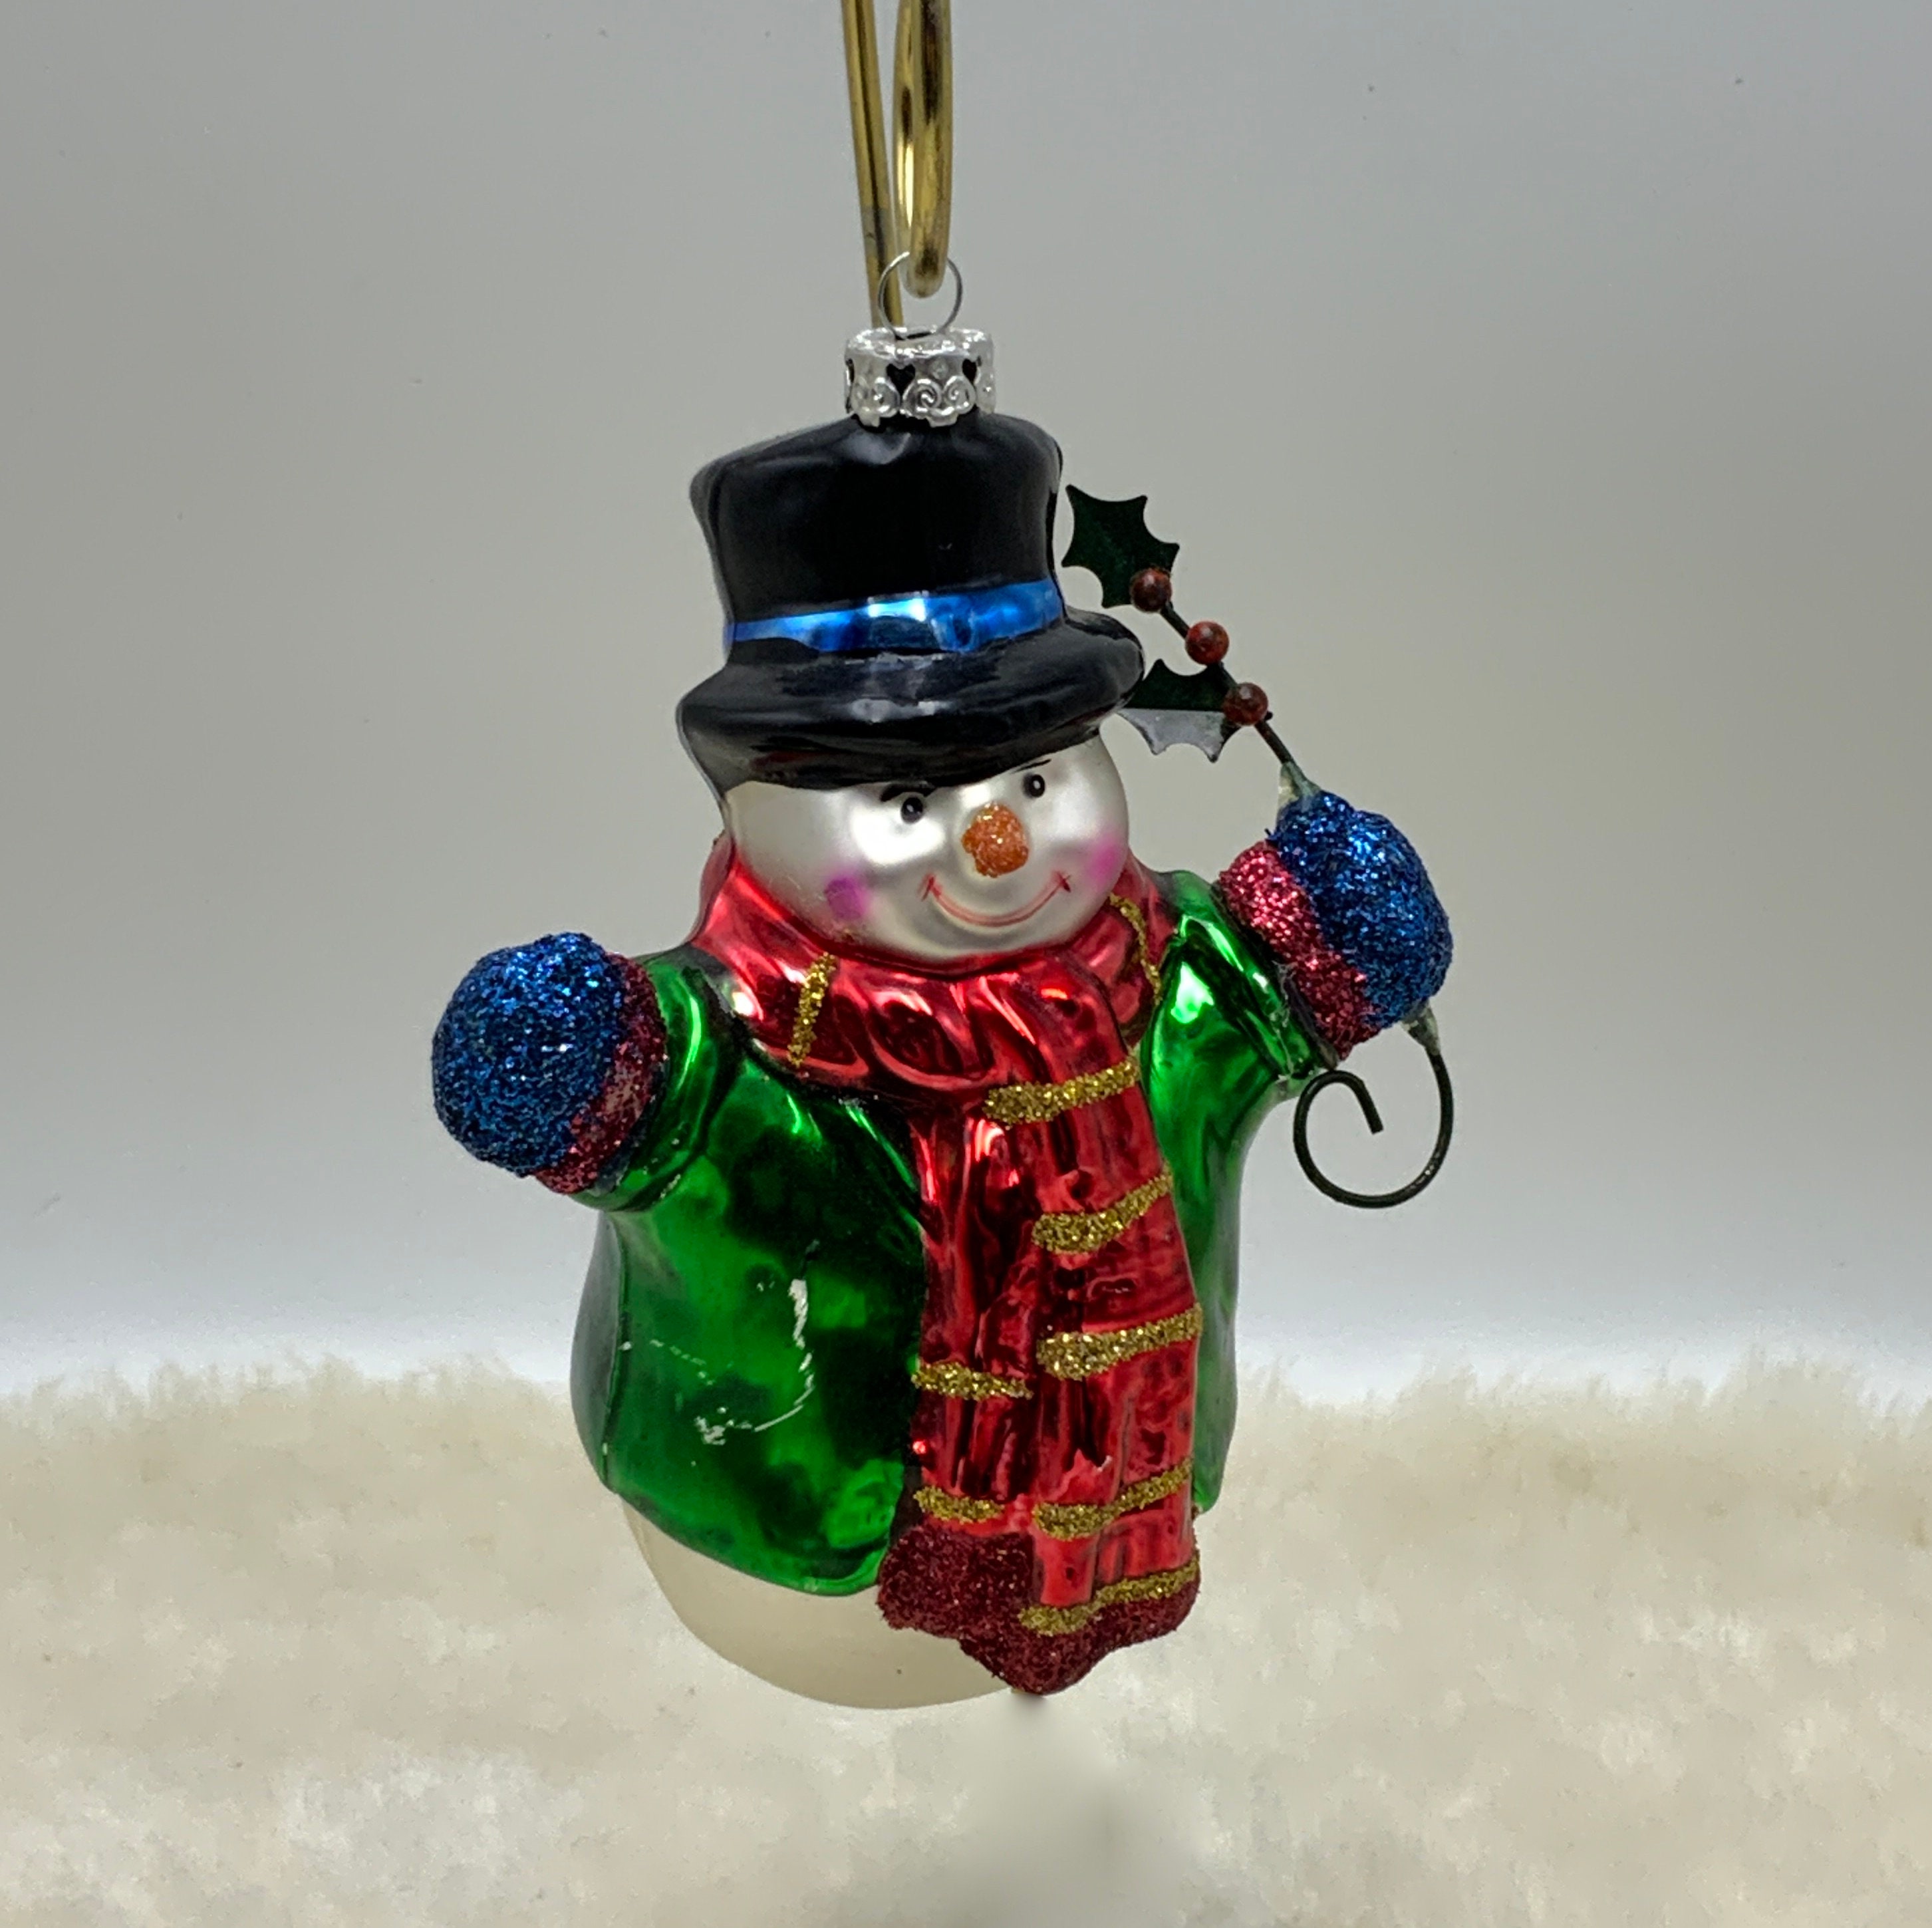 How to Make a Snowman Hat Ornament